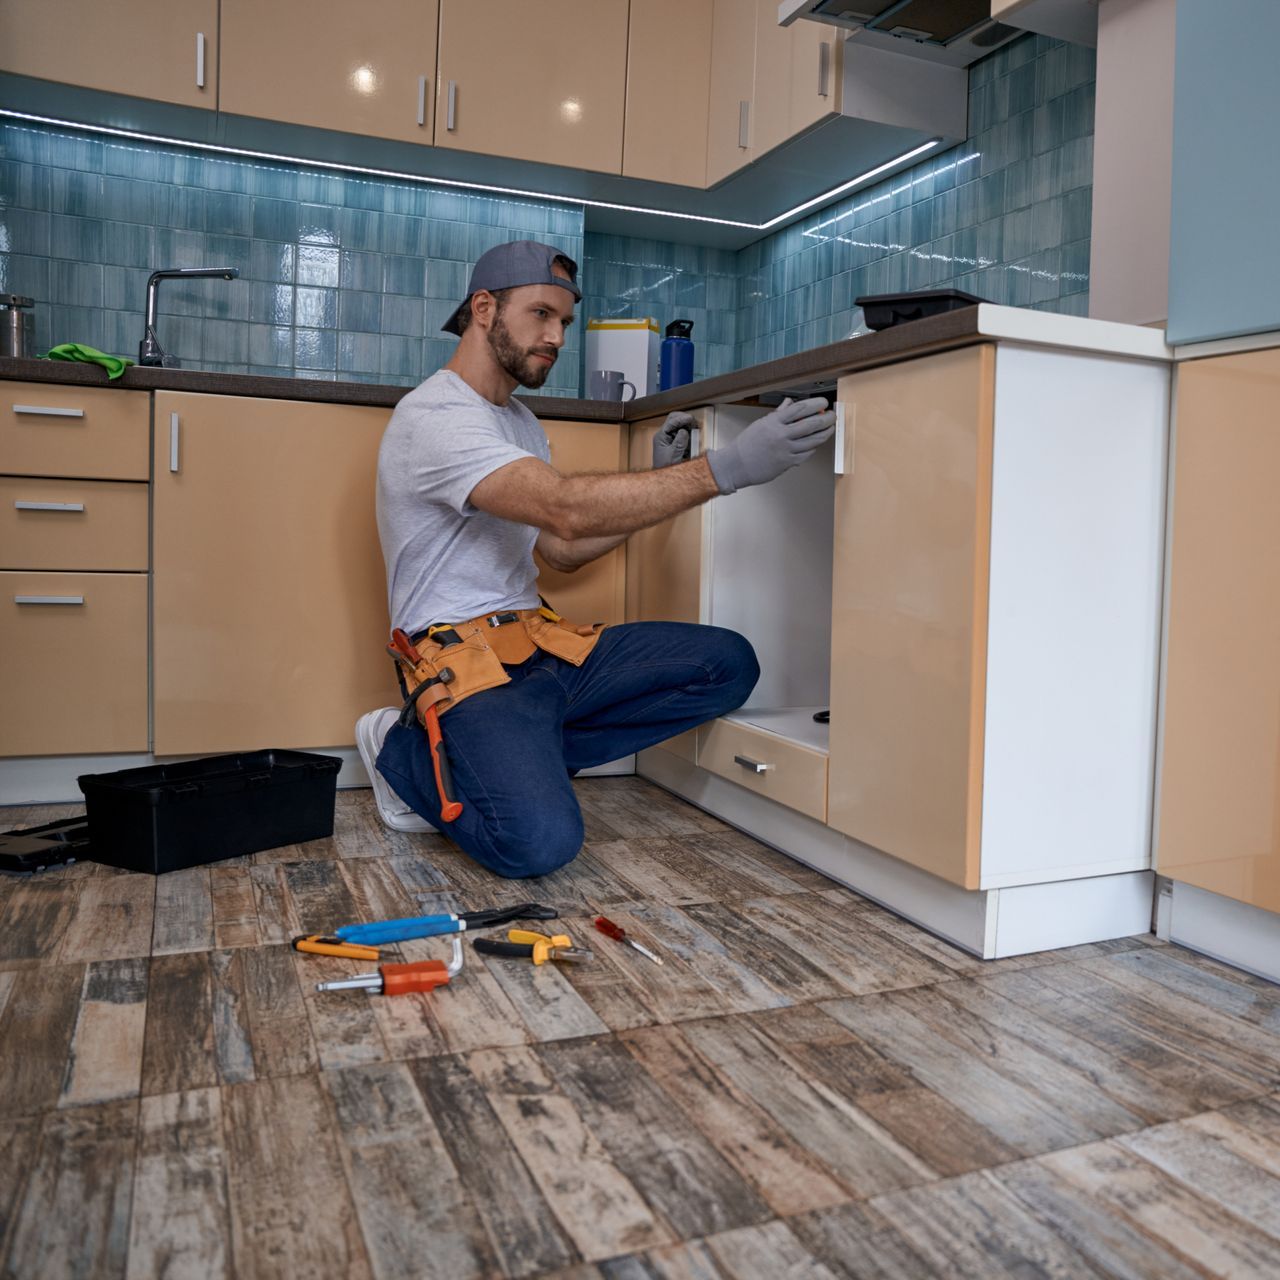 a man is kneeling on the floor in a kitchen fixing a sink .